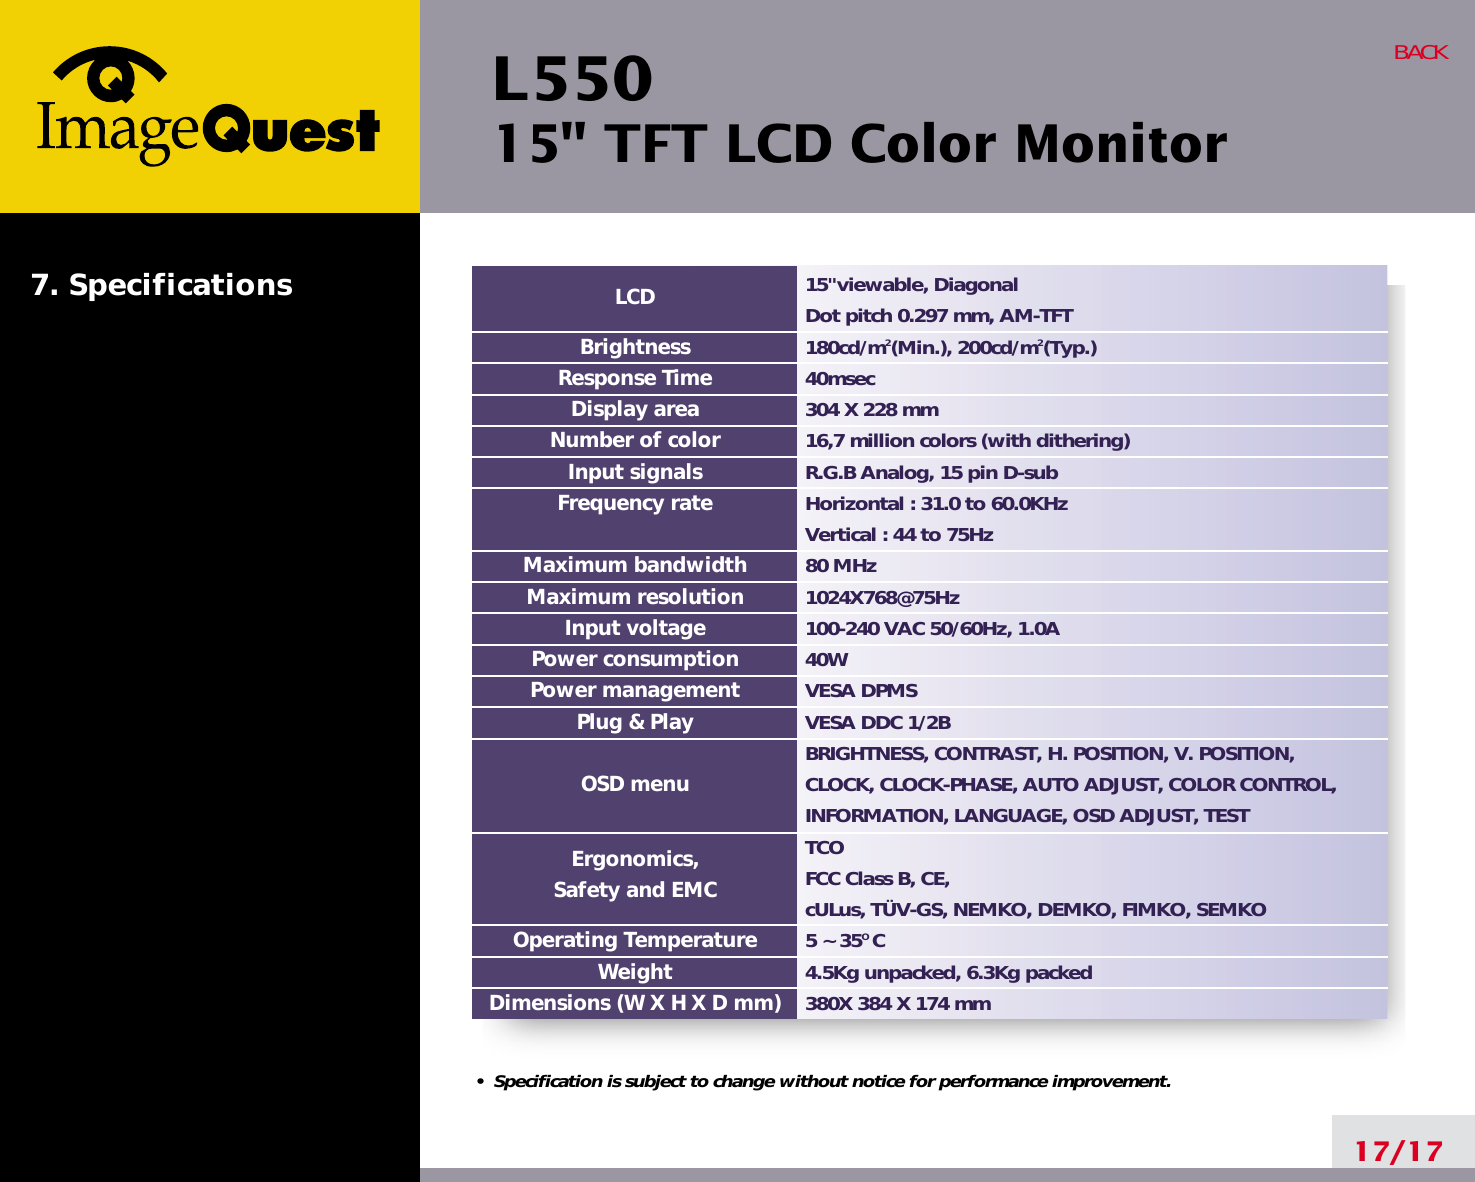 L550 15&quot; TFT LCD Color Monitor17/17BACK15&quot;viewable, DiagonalDot pitch 0.297 mm, AM-TFT 180cd/m2(Min.), 200cd/m2(Typ.)40msec304 X 228 mm16,7 million colors (with dithering)R.G.B Analog, 15 pin D-subHorizontal : 31.0 to 60.0KHzVertical : 44 to 75Hz80 MHz1024X768@75Hz100-240 VAC 50/60Hz, 1.0A40WVESA DPMSVESA DDC 1/2BBRIGHTNESS, CONTRAST, H. POSITION, V. POSITION, CLOCK, CLOCK-PHASE, AUTO ADJUST, COLOR CONTROL,INFORMATION, LANGUAGE, OSD ADJUST, TESTTCOFCC Class B, CE,cULus, TÜV-GS, NEMKO, DEMKO, FIMKO, SEMKO5 ~ 35O C4.5Kg unpacked, 6.3Kg packed380X 384 X 174 mmLCDBrightnessResponse TimeDisplay areaNumber of colorInput signalsFrequency rateMaximum bandwidthMaximum resolutionInput voltagePower consumptionPower managementPlug &amp; PlayOSD menuErgonomics,Safety and EMCOperating TemperatureWeightDimensions (W X H X D mm)•  Specification is subject to change without notice for performance improvement.7. Specifications